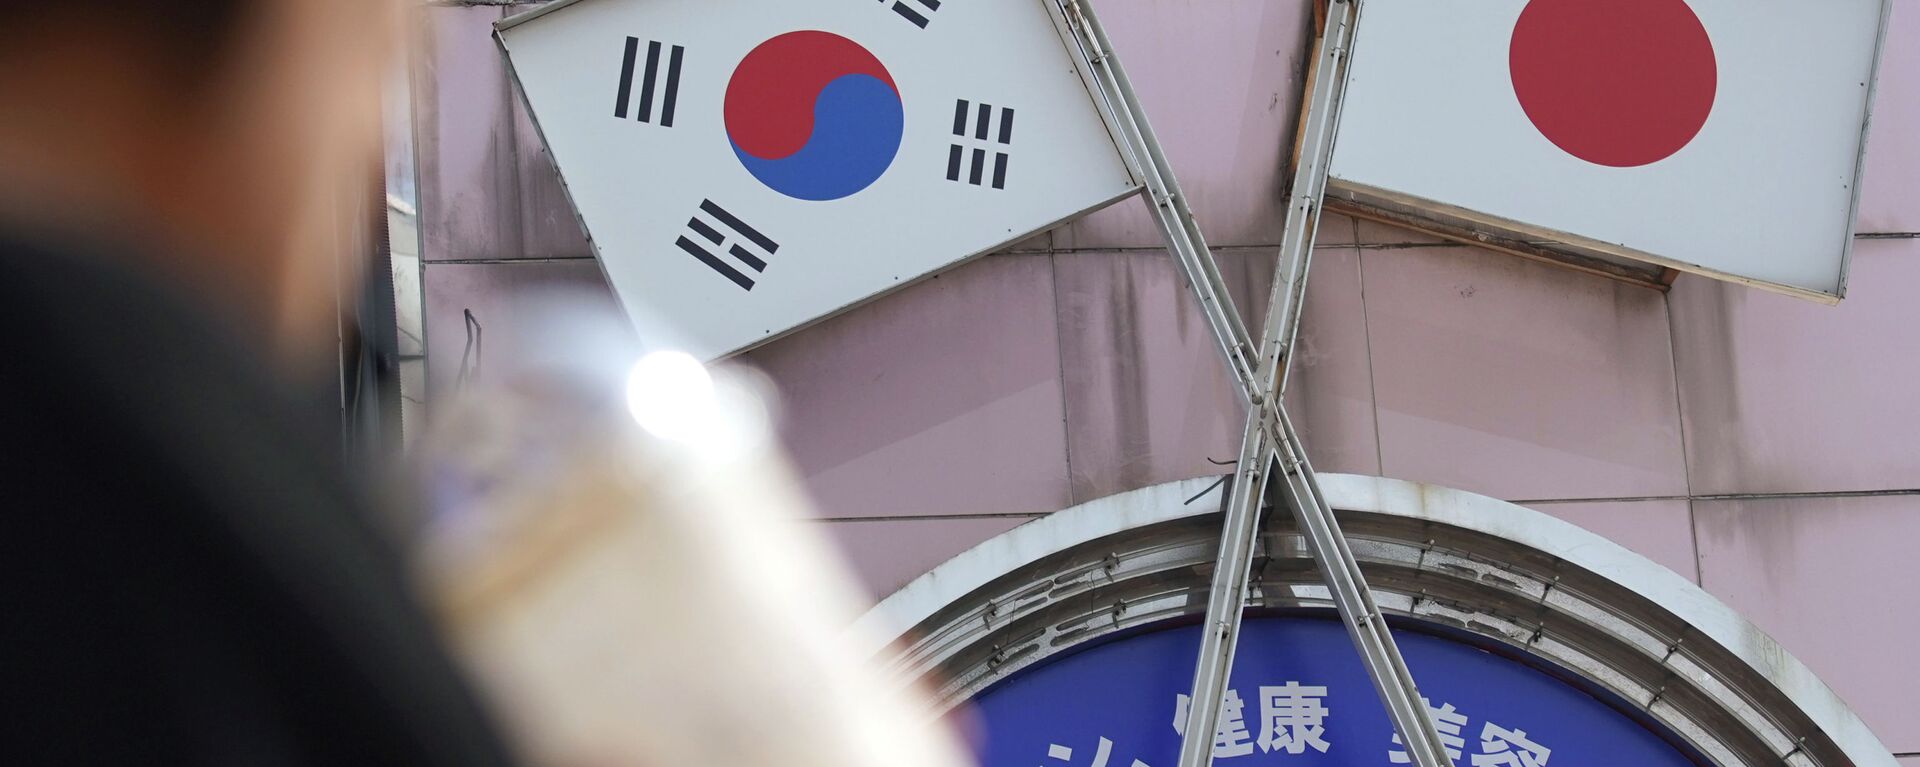 A woman walks past an advertisement featuring Japanese and South Korean flags at a shop in Shin Okubo area in Tokyo Friday, Aug. 2, 2019 - Sputnik International, 1920, 20.03.2023